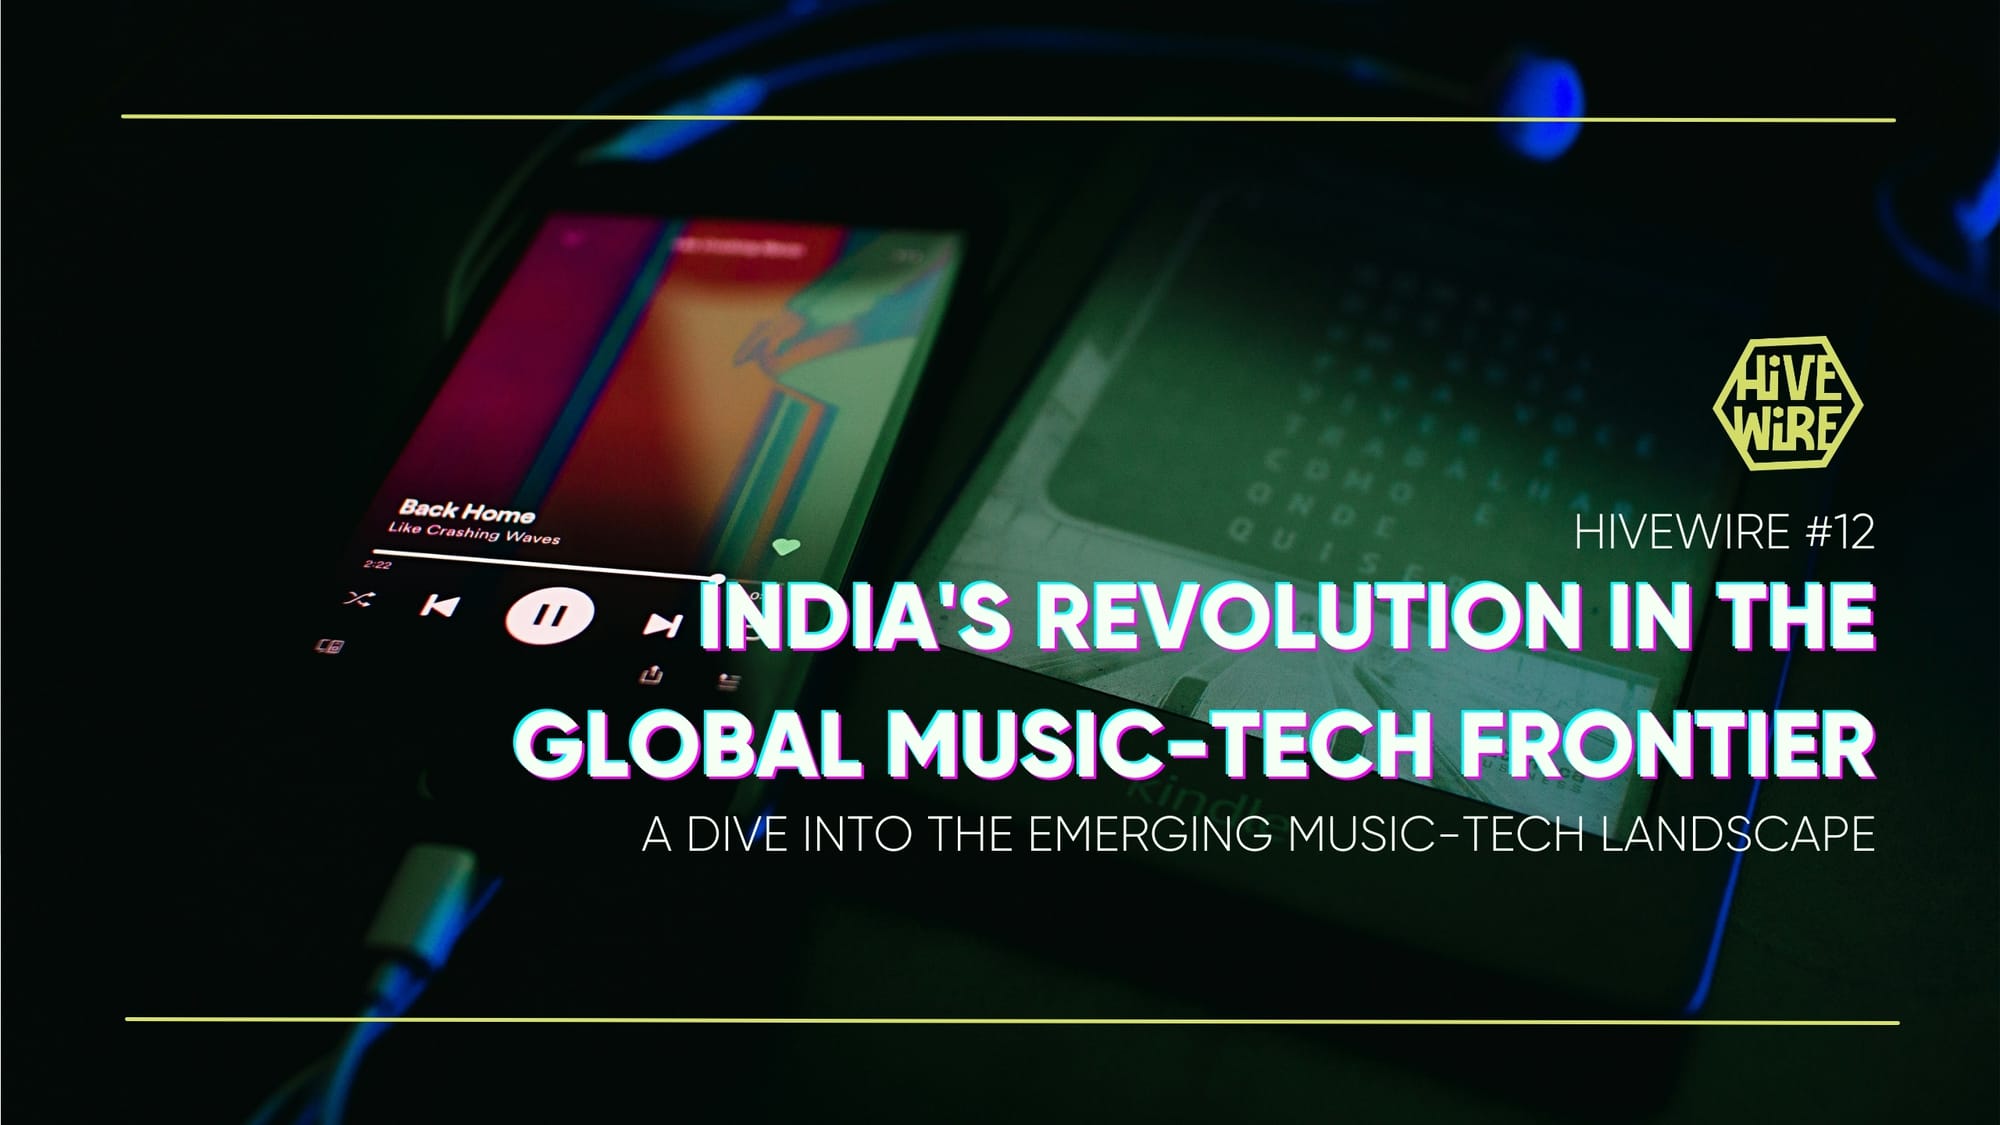 HIVEWIRE #12: India's Revolution in the Global Music-Tech Frontier